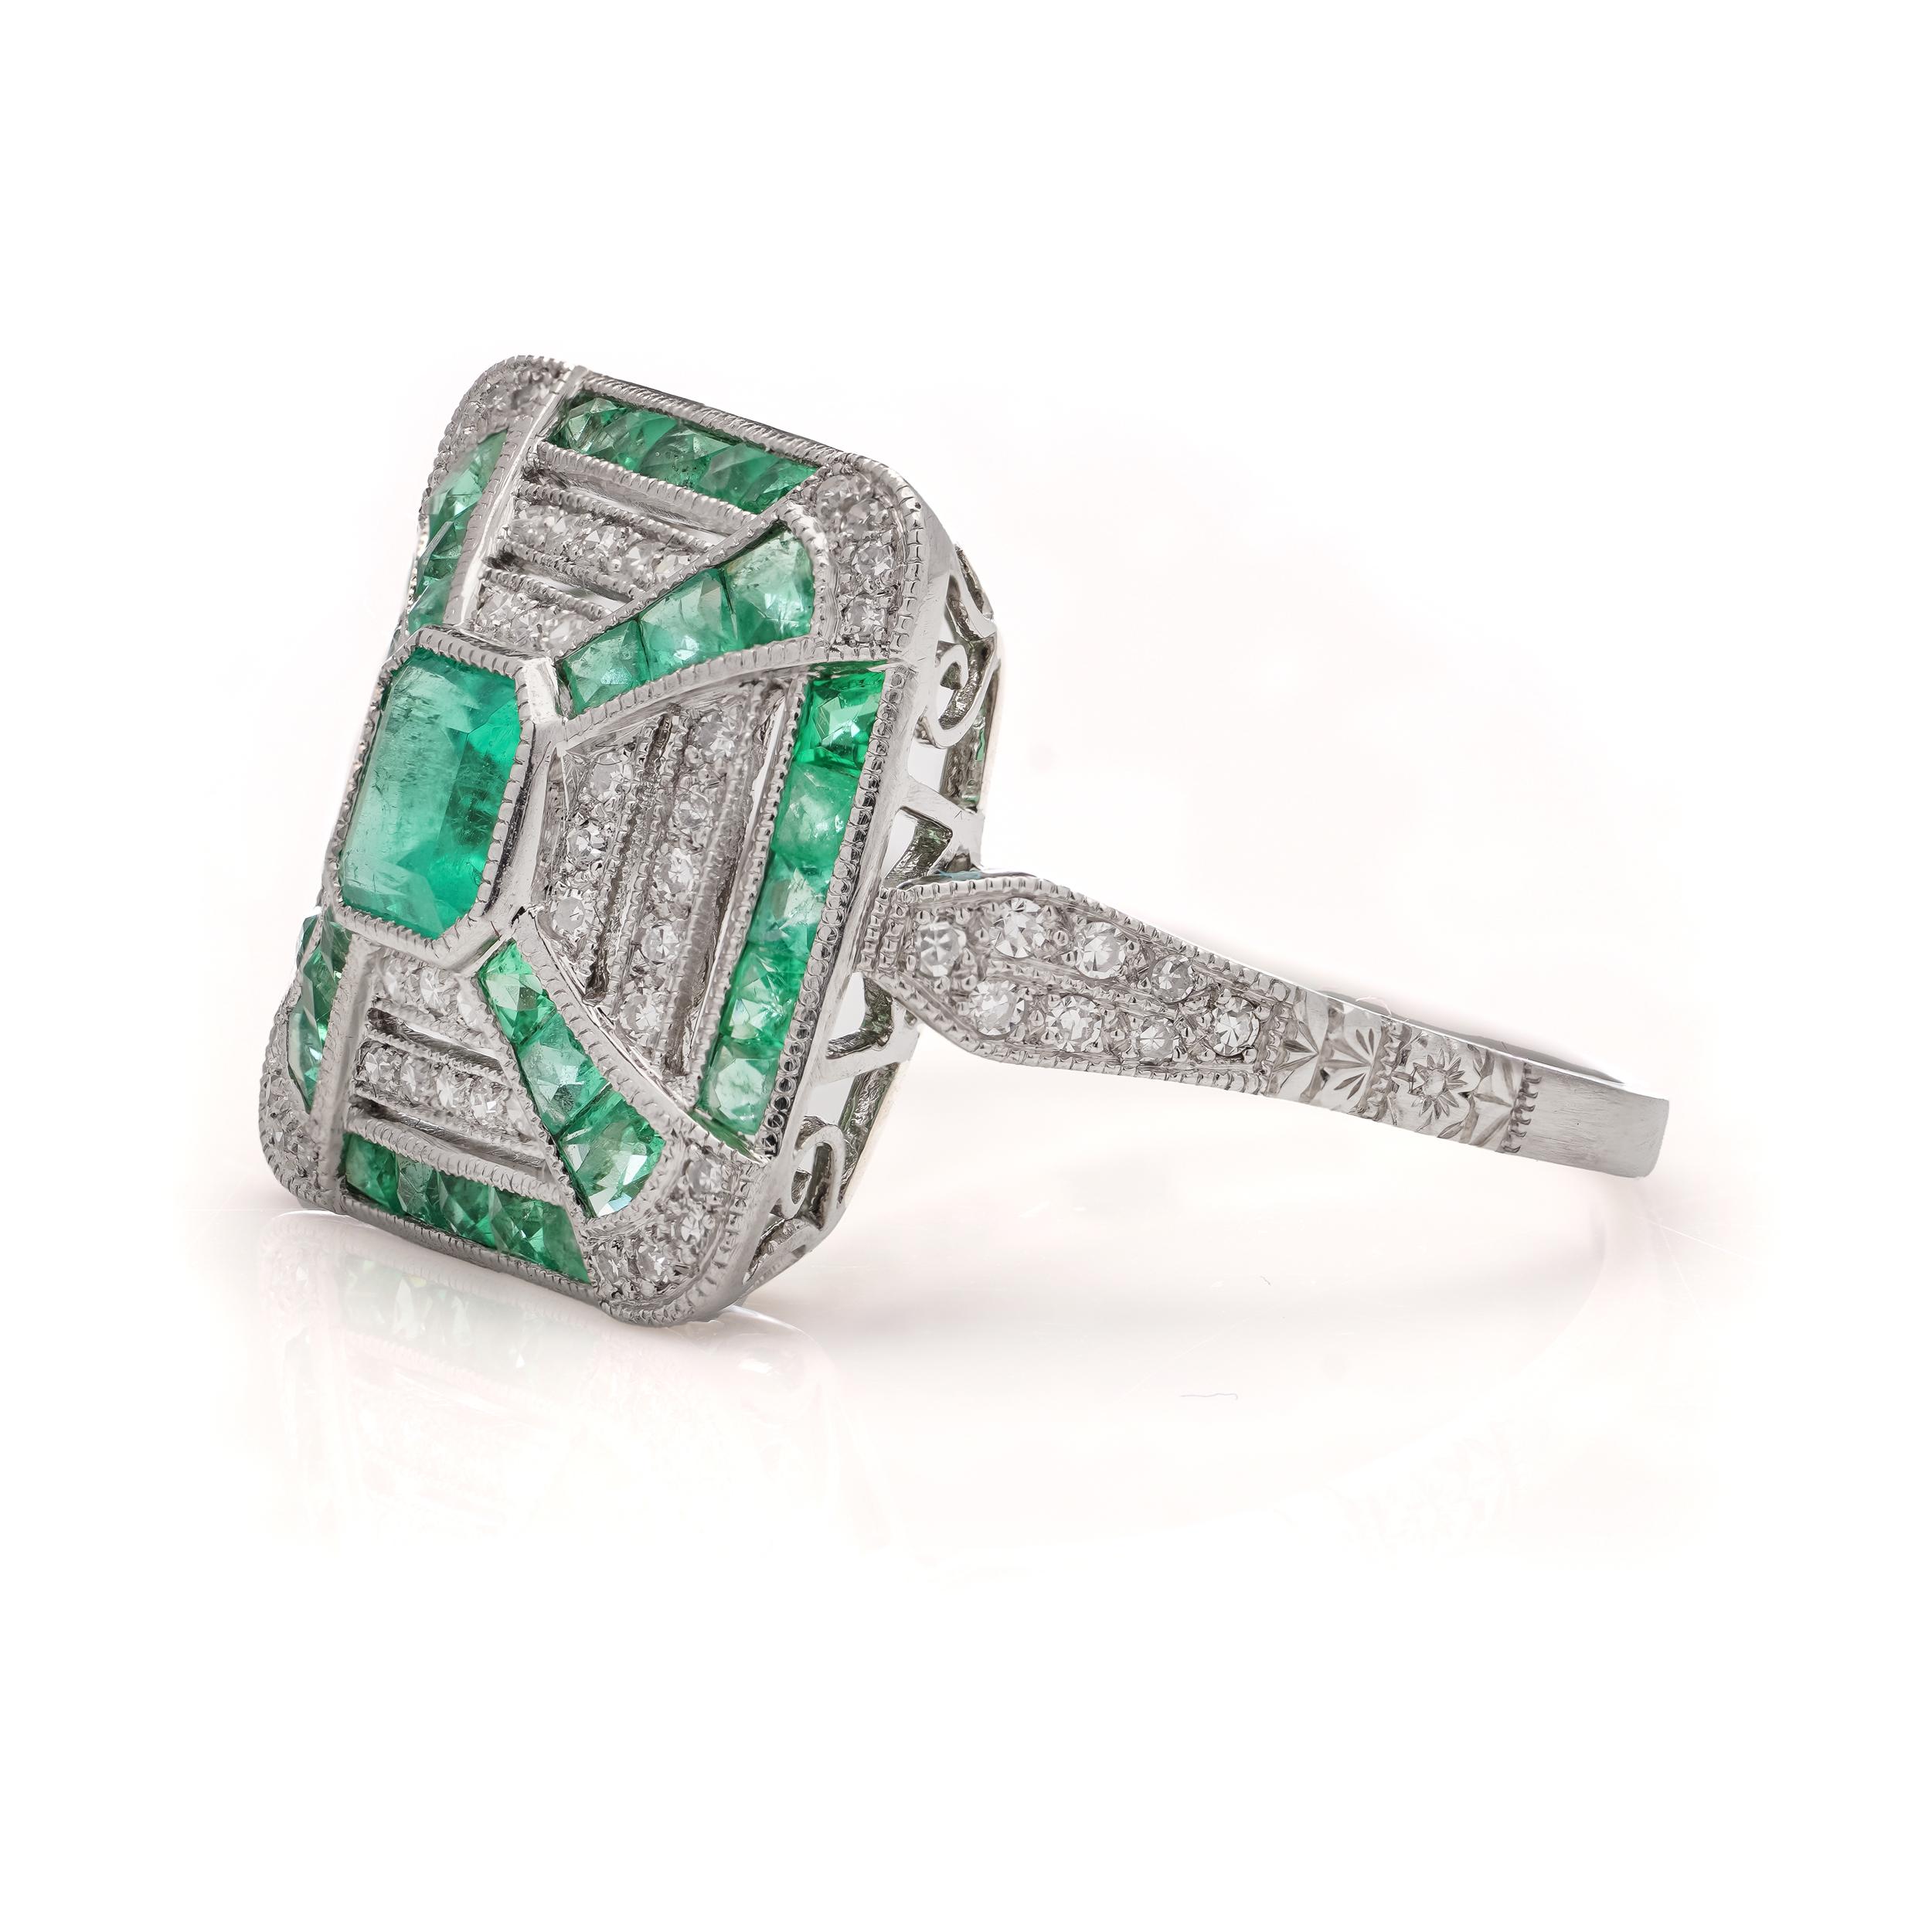 Platinum Art Deco-inspired 0.42 carats of Emerald fashion ring For Sale 1